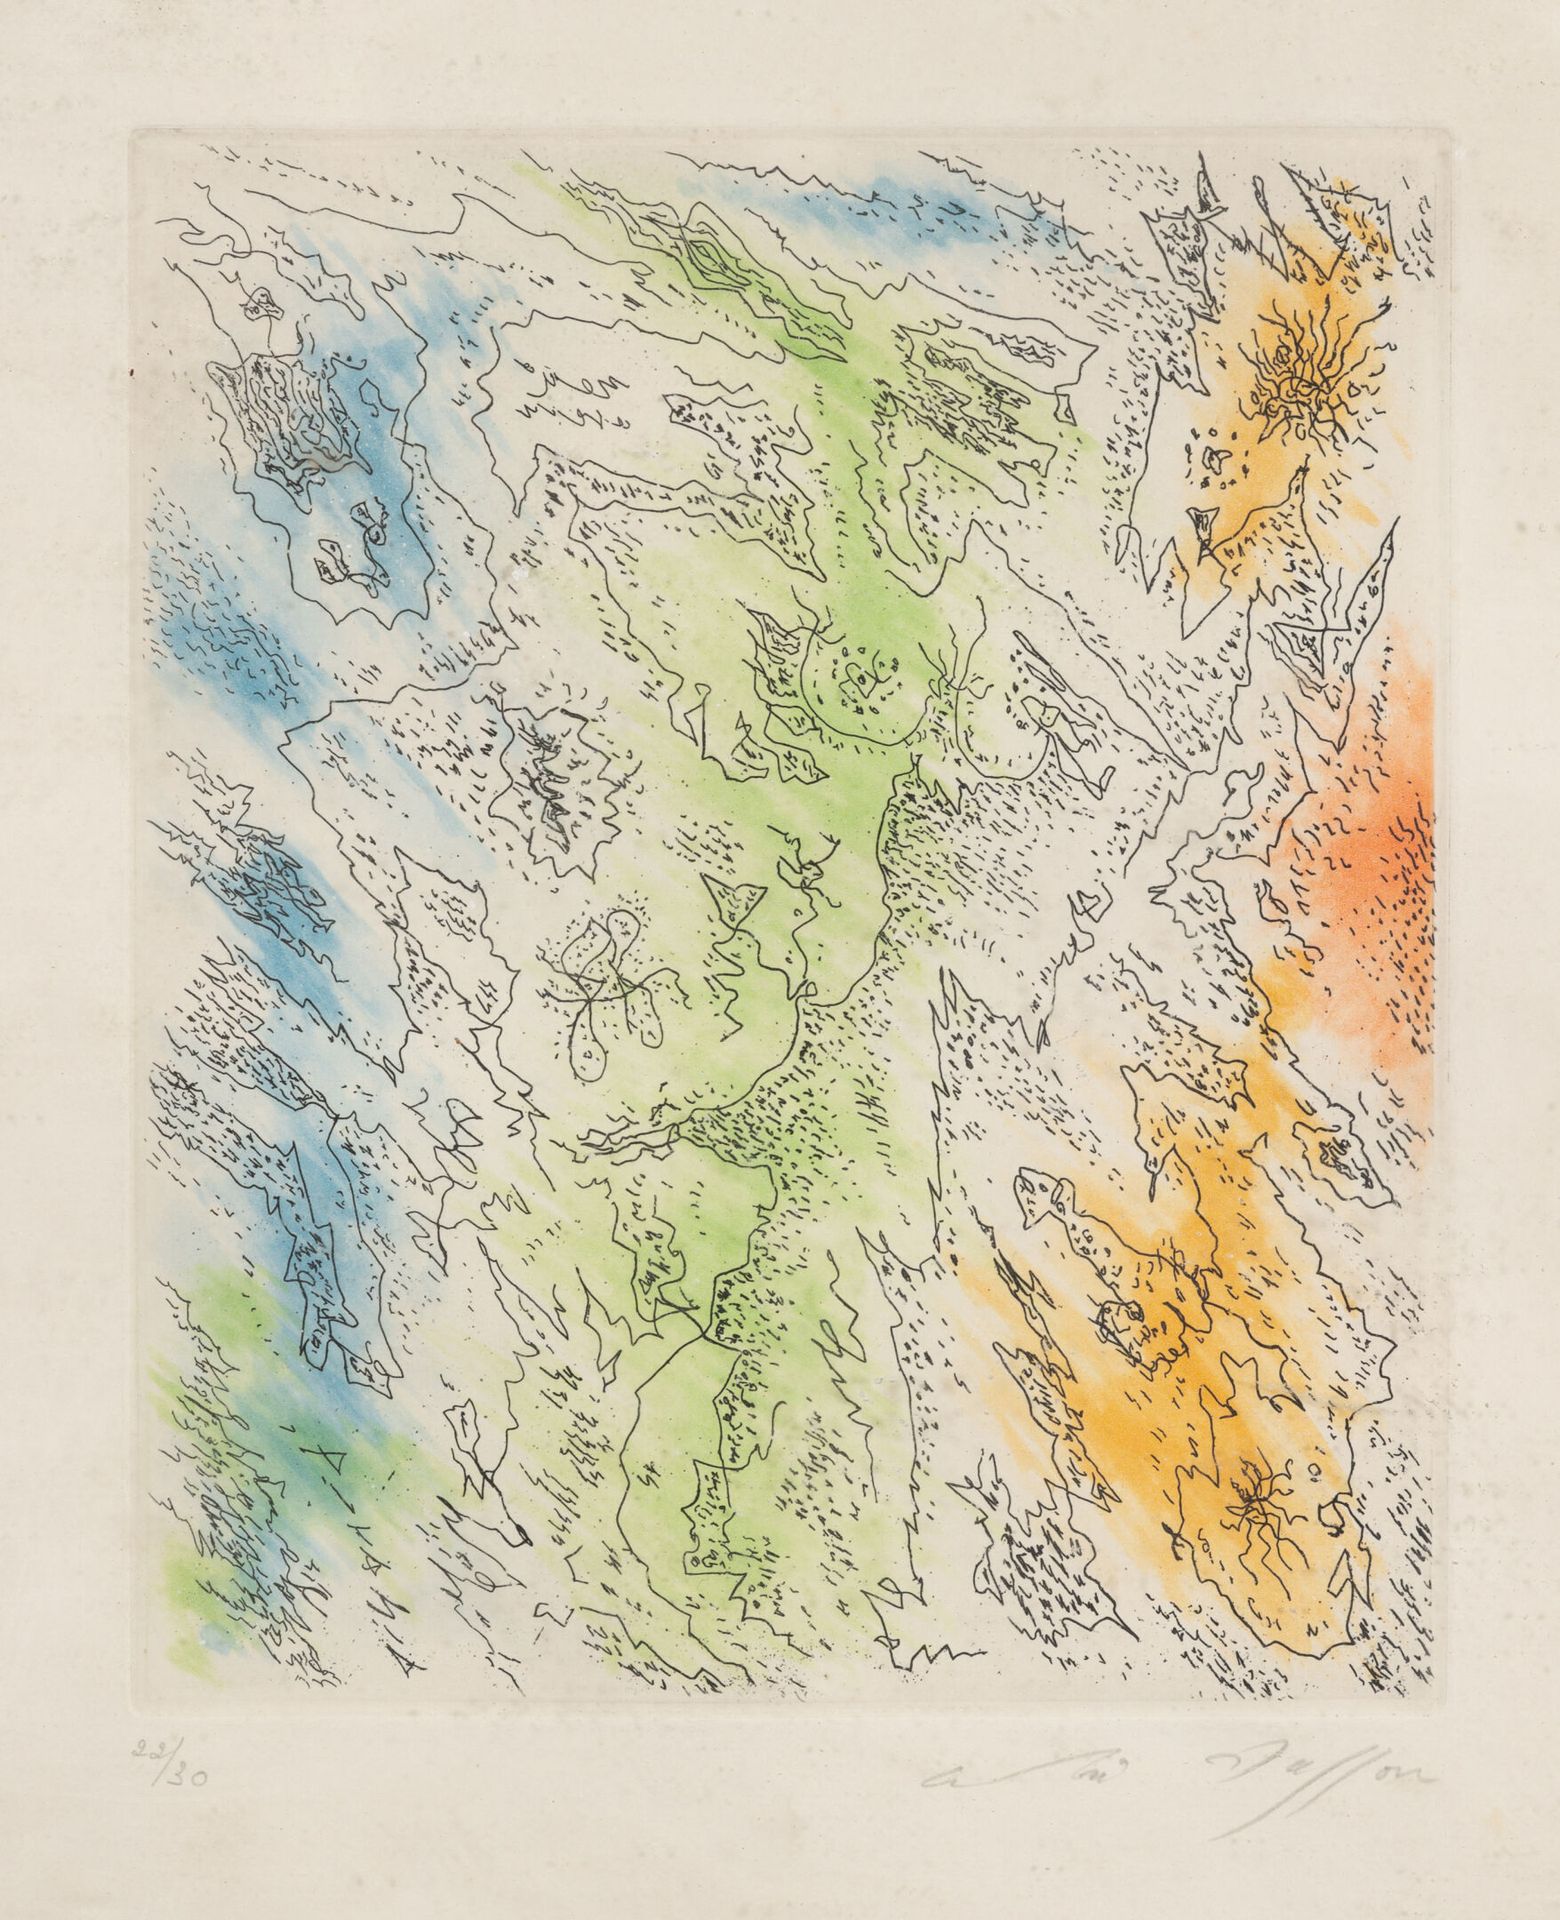 André MASSON (1896-1987) Titania, 1960.
Etching on paper.
Signed lower right and&hellip;